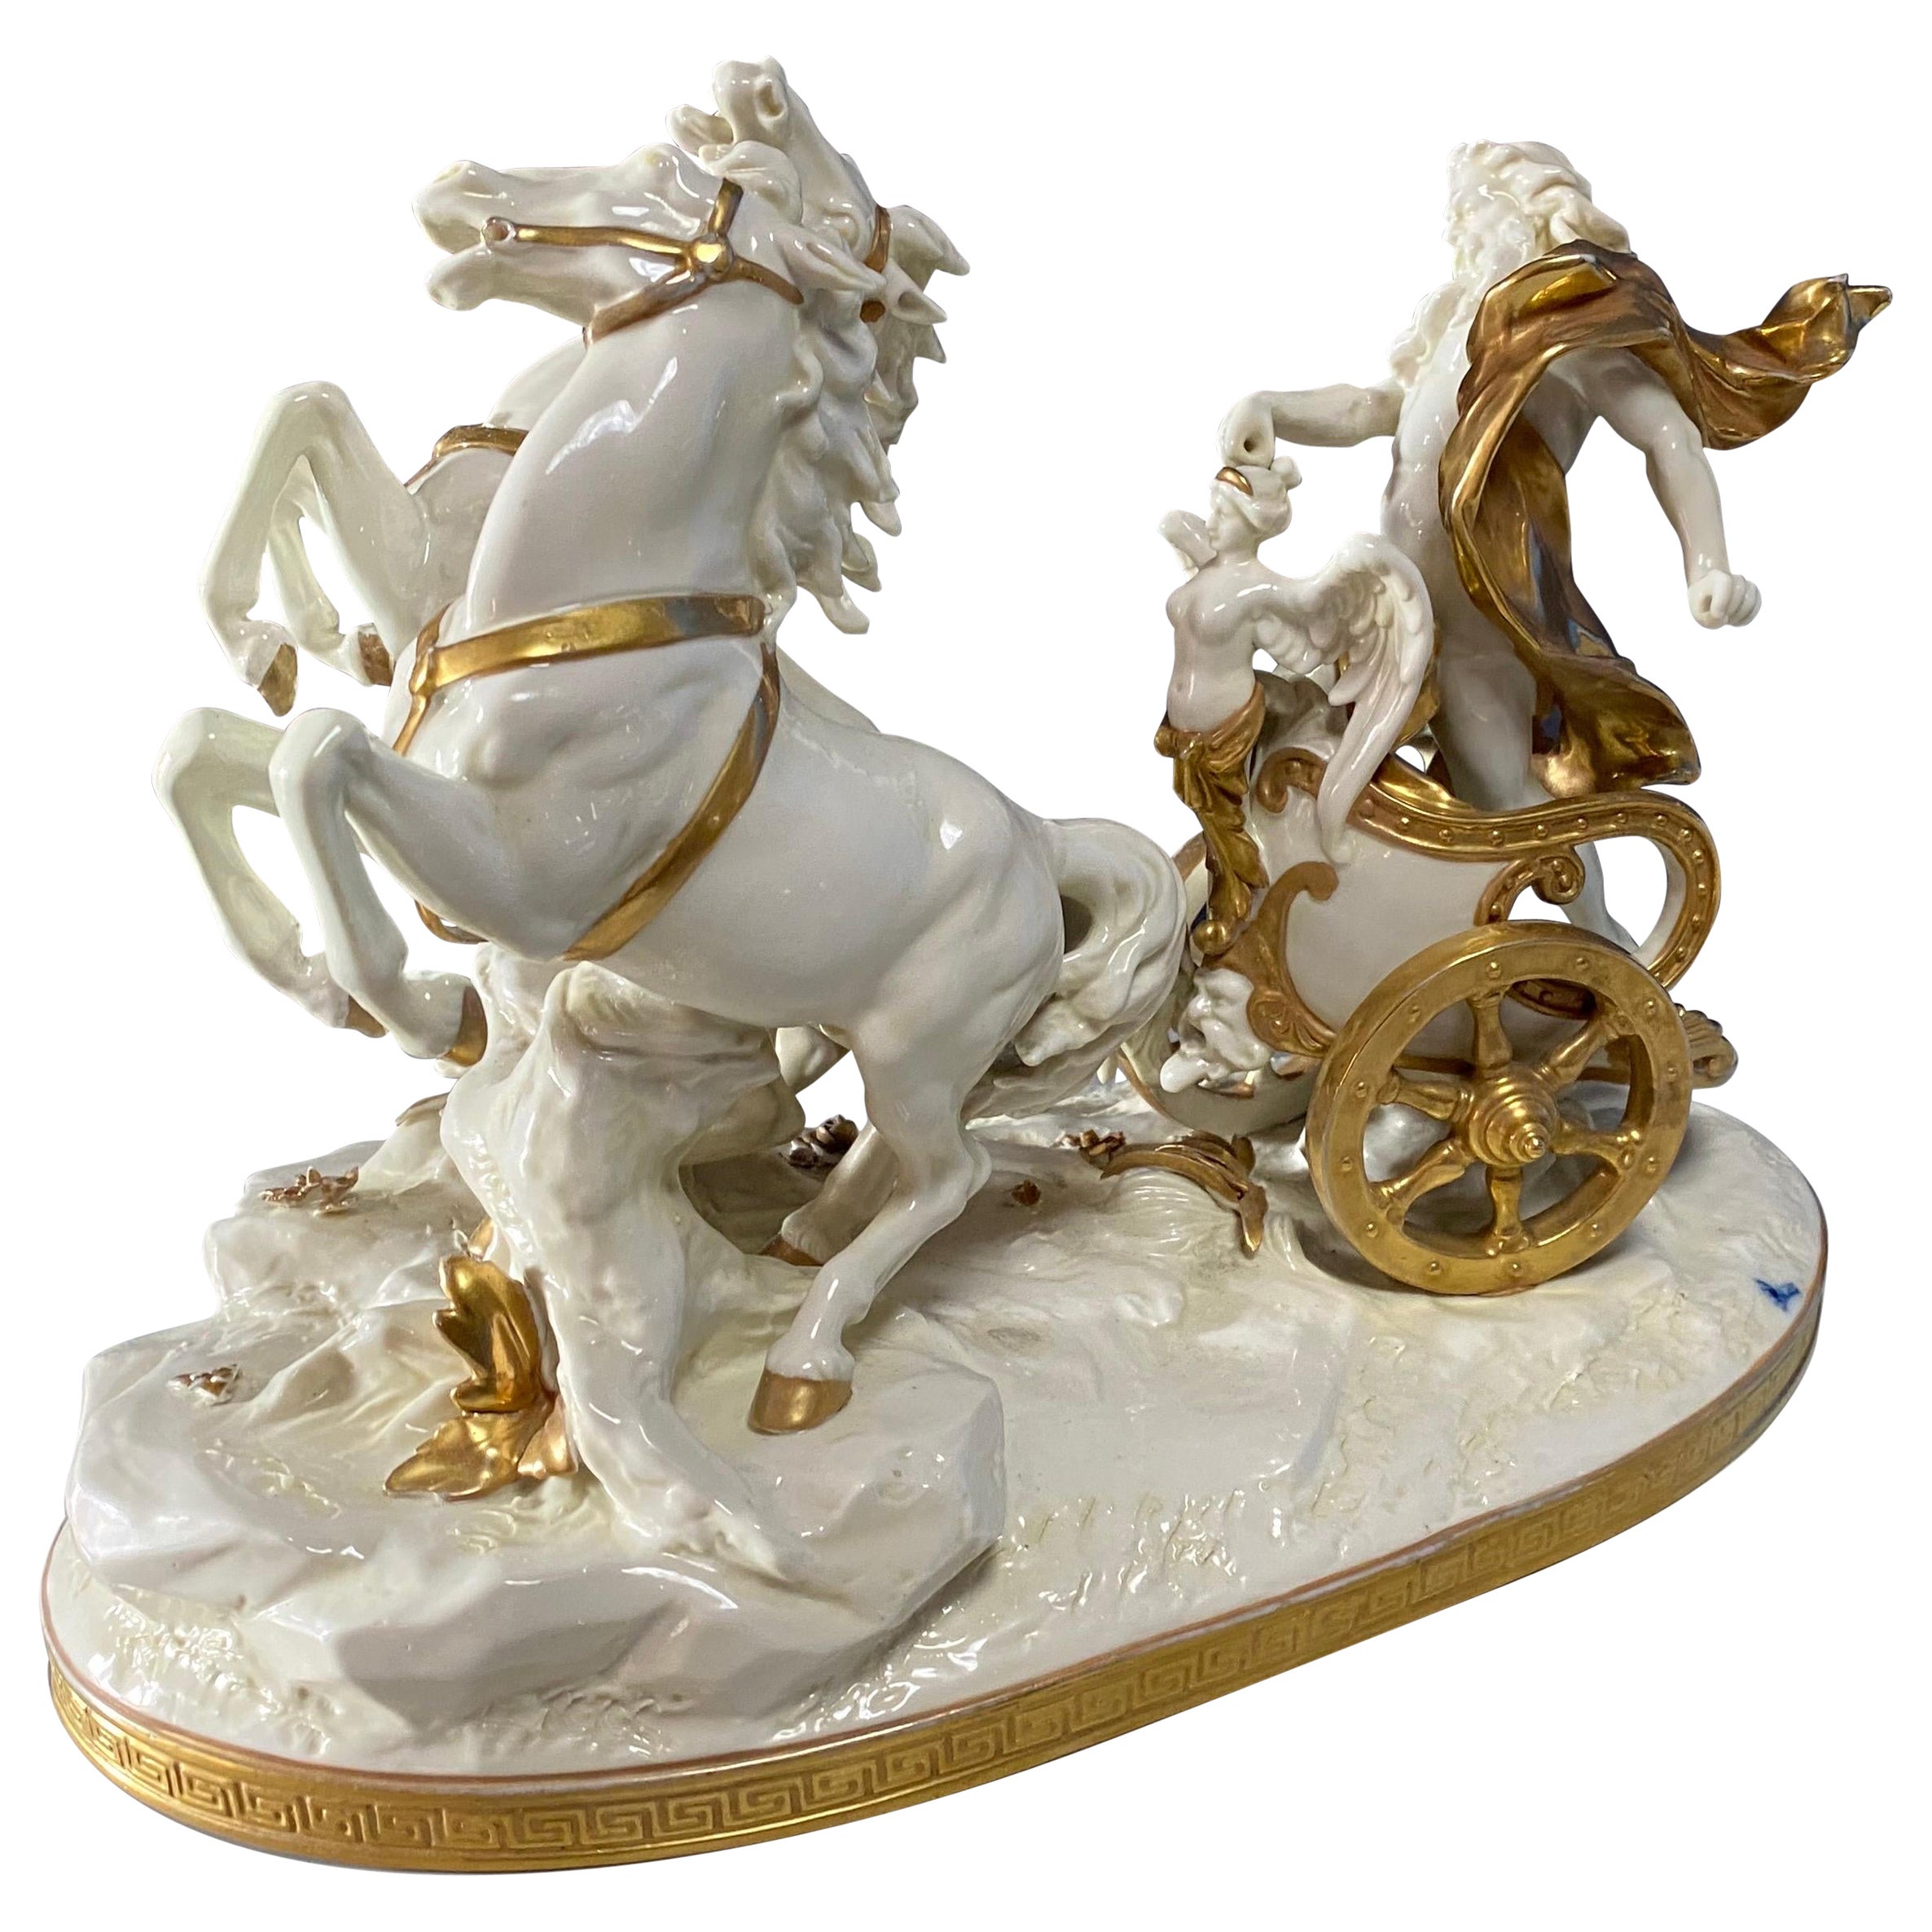 wonderful Capodimonte porcelain from the early 1900s For Sale